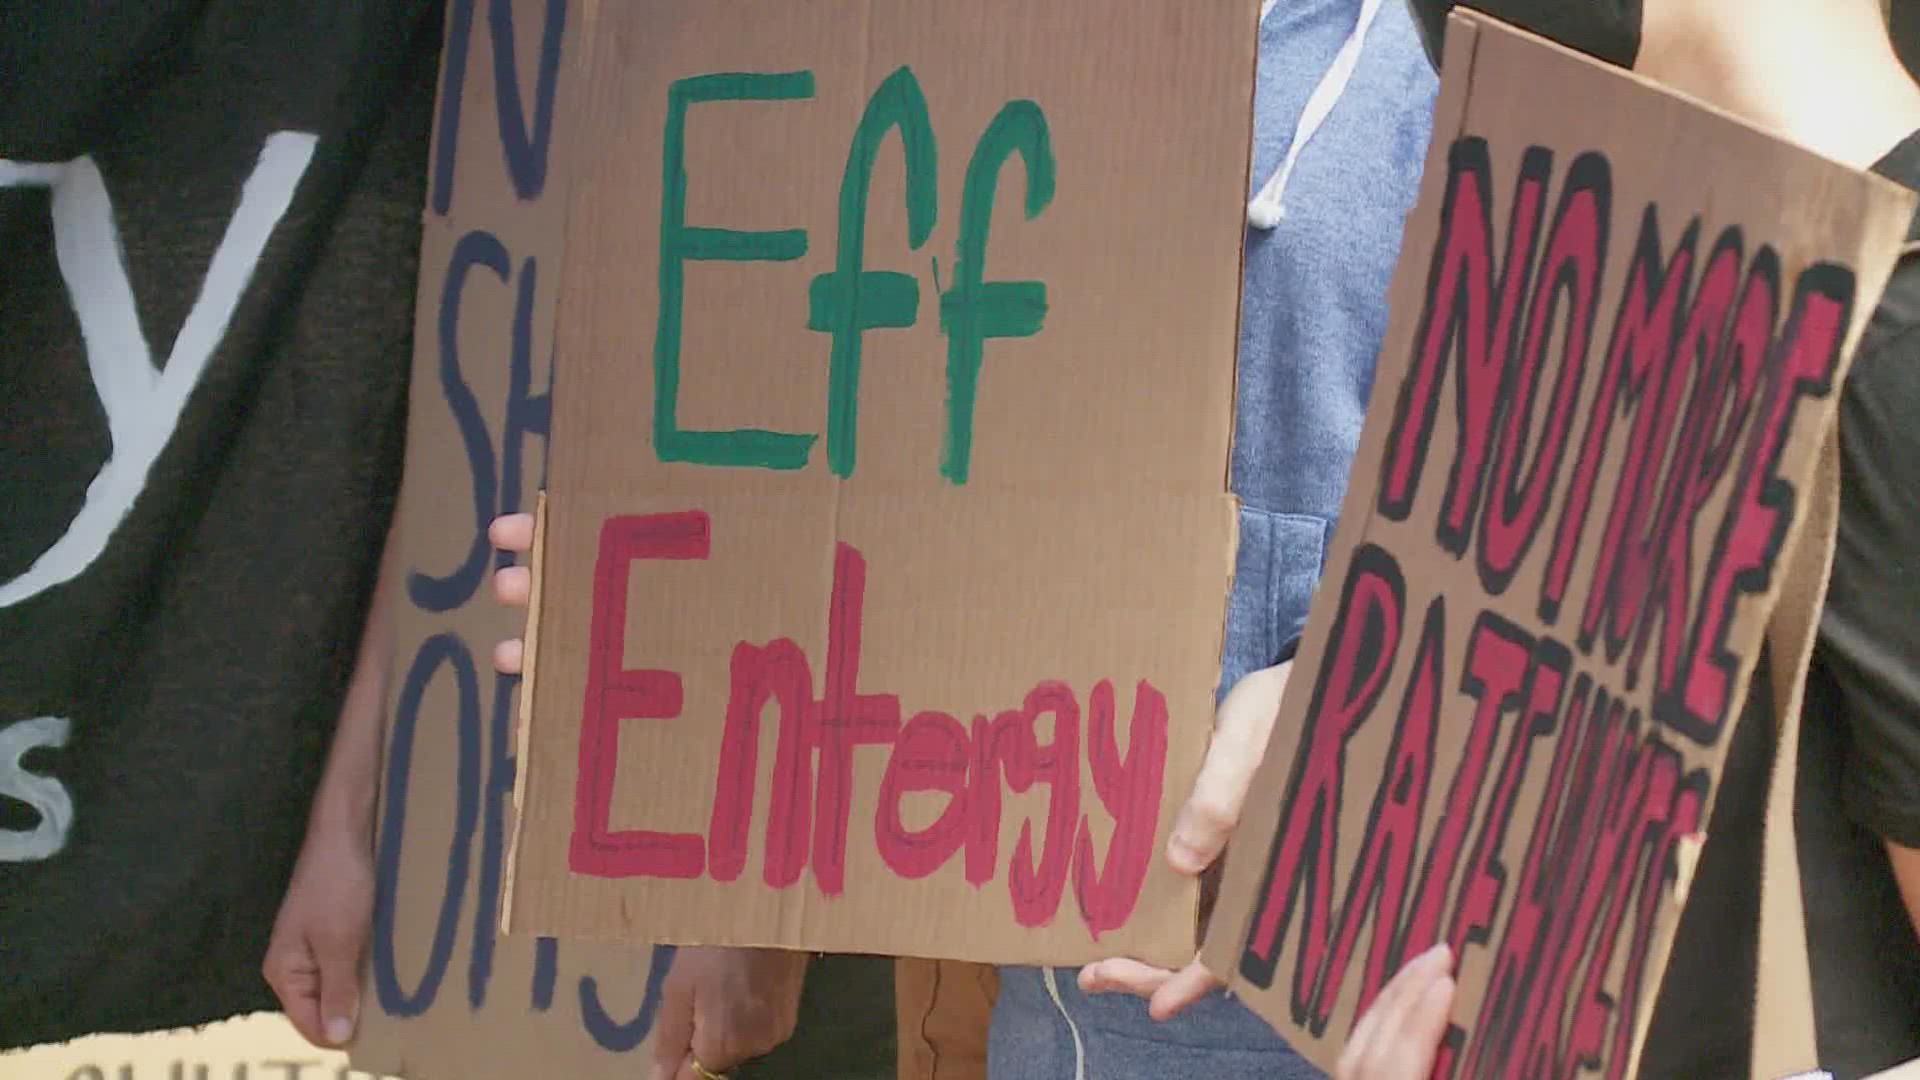 Customers have had enough of Entergy's sky-high prices